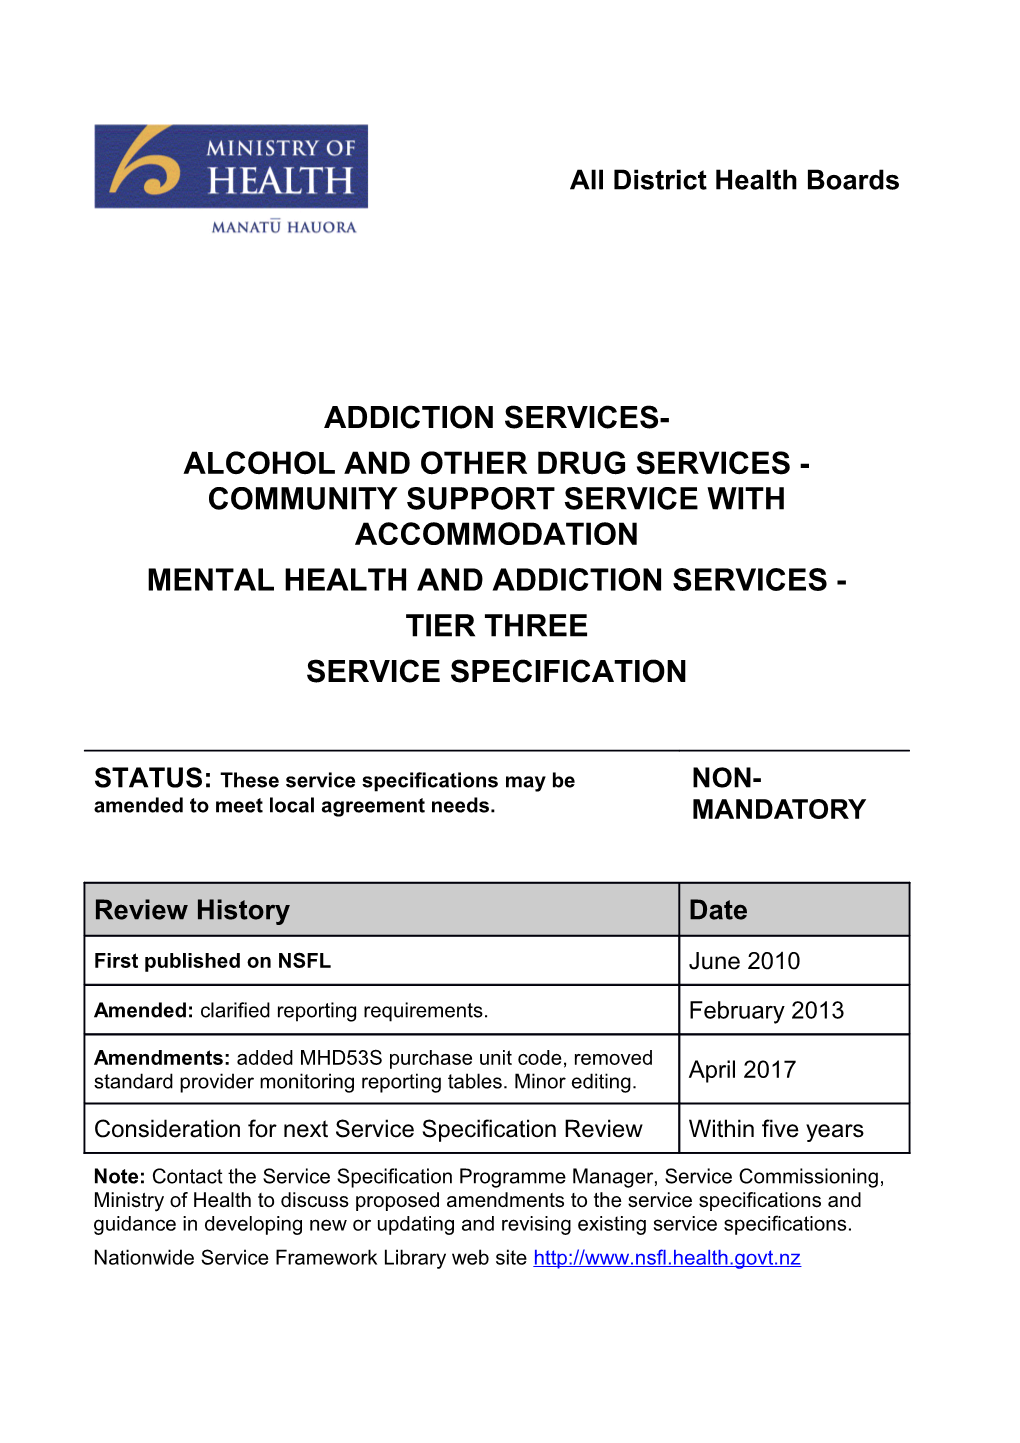 Addiction Services-Alcohol and Other Drug Services